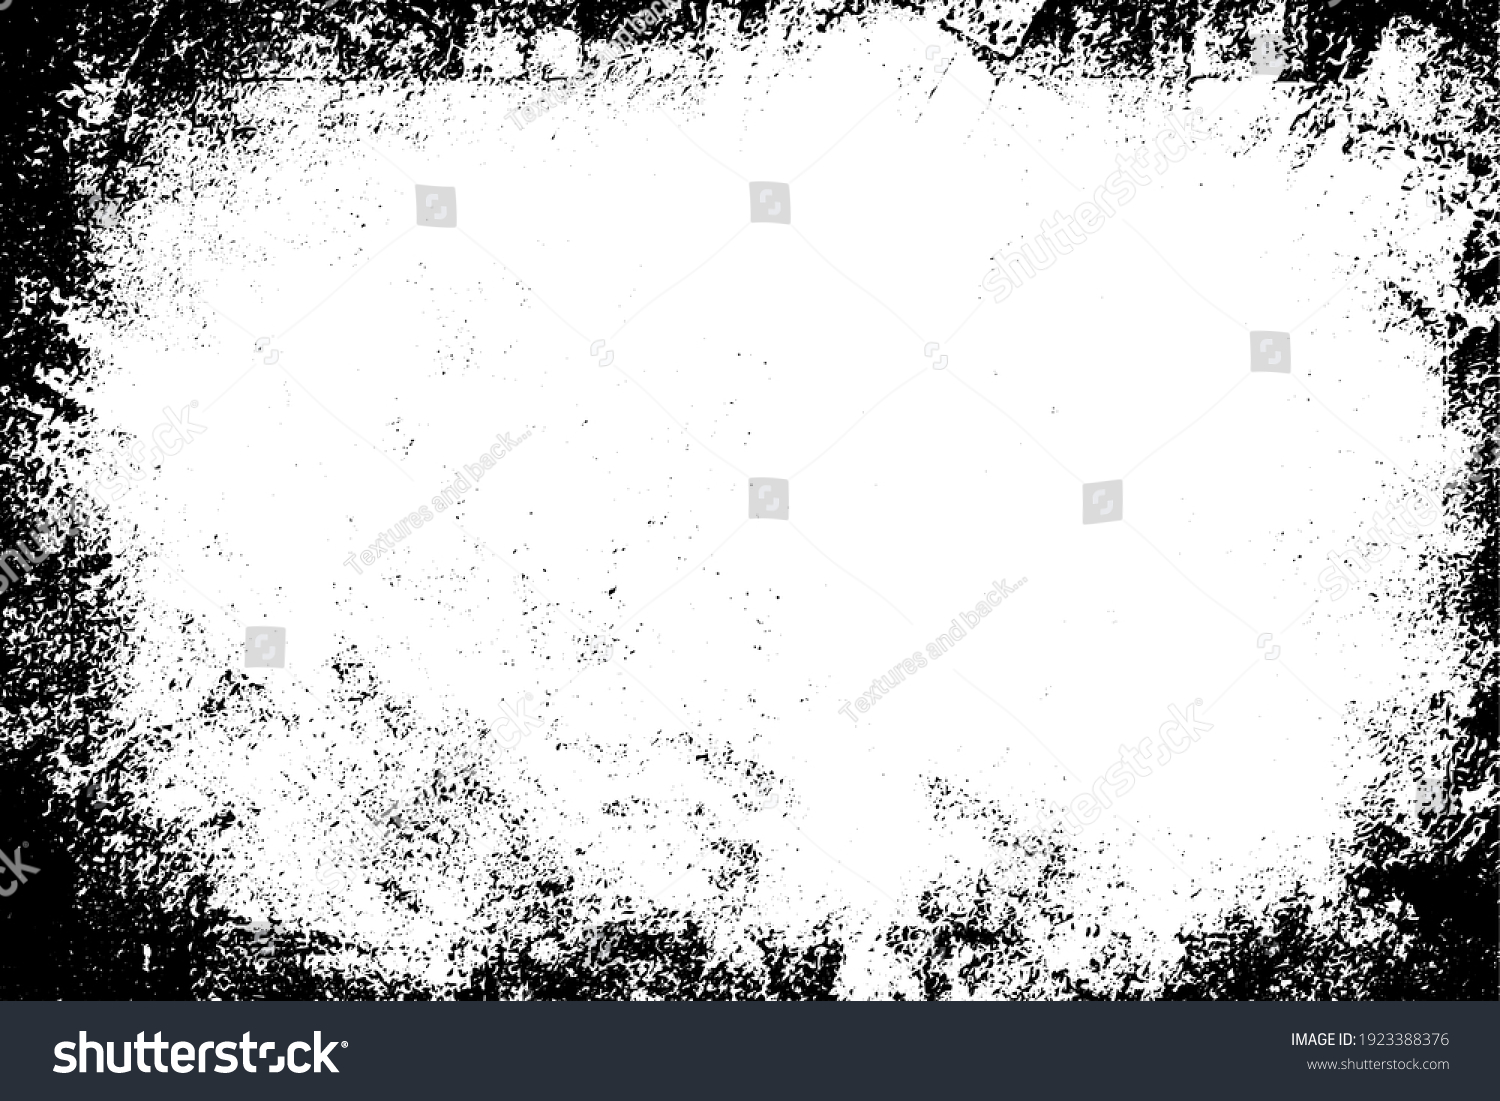 Black and white background. Monochrome grunge background. Abstract texture of dirt, dust, blots, chips. Dirty dirty surface #1923388376